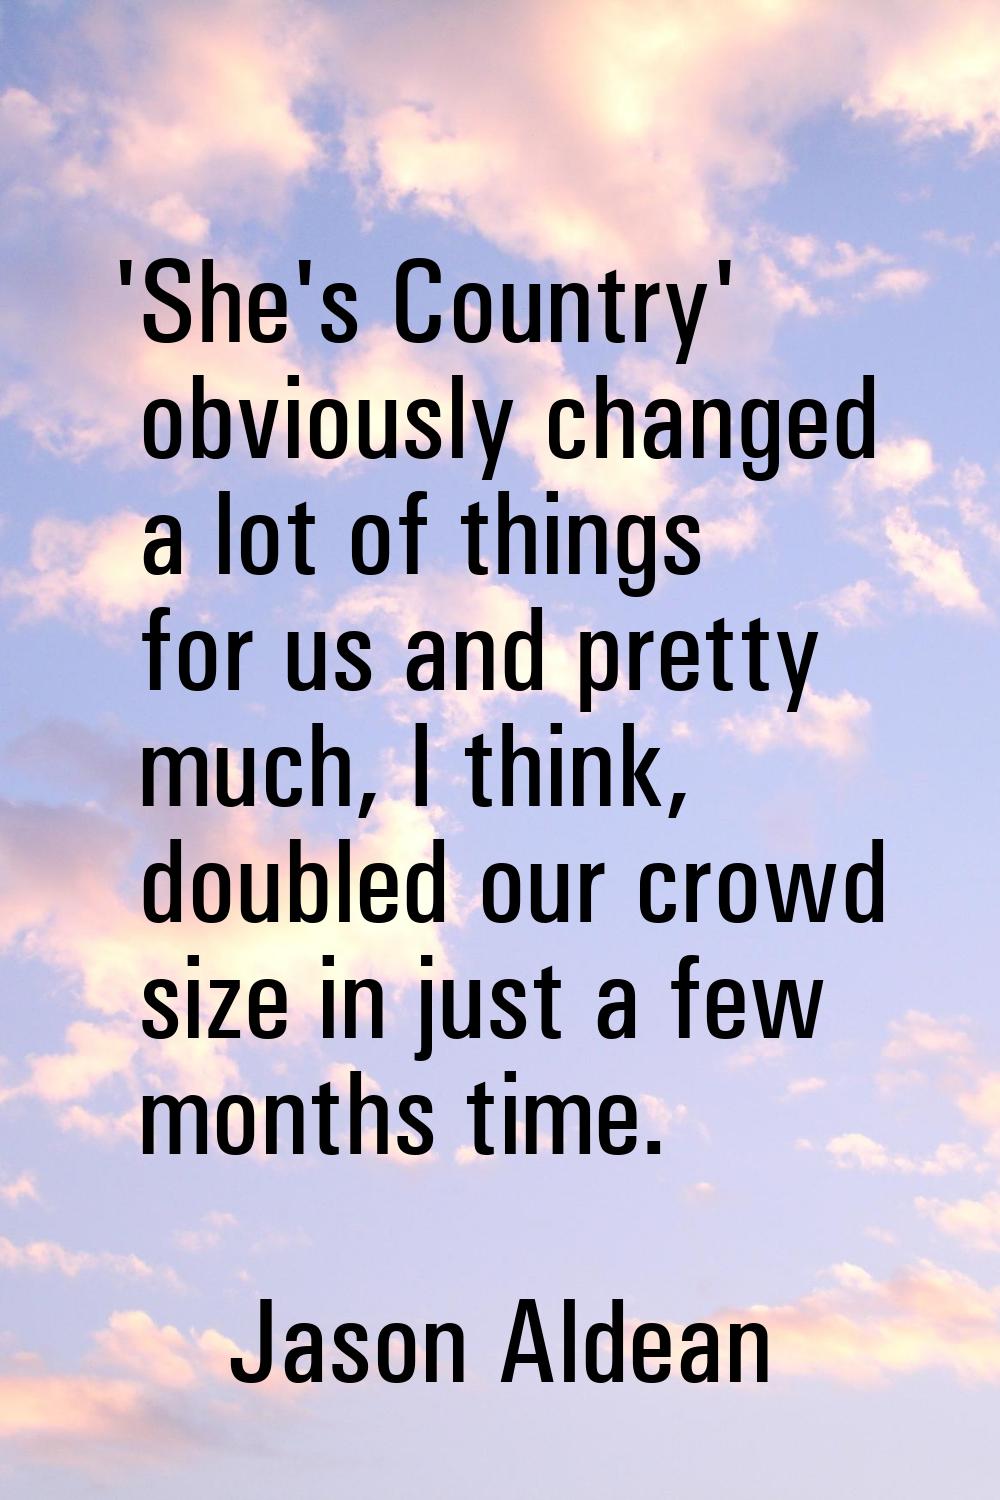 'She's Country' obviously changed a lot of things for us and pretty much, I think, doubled our crow